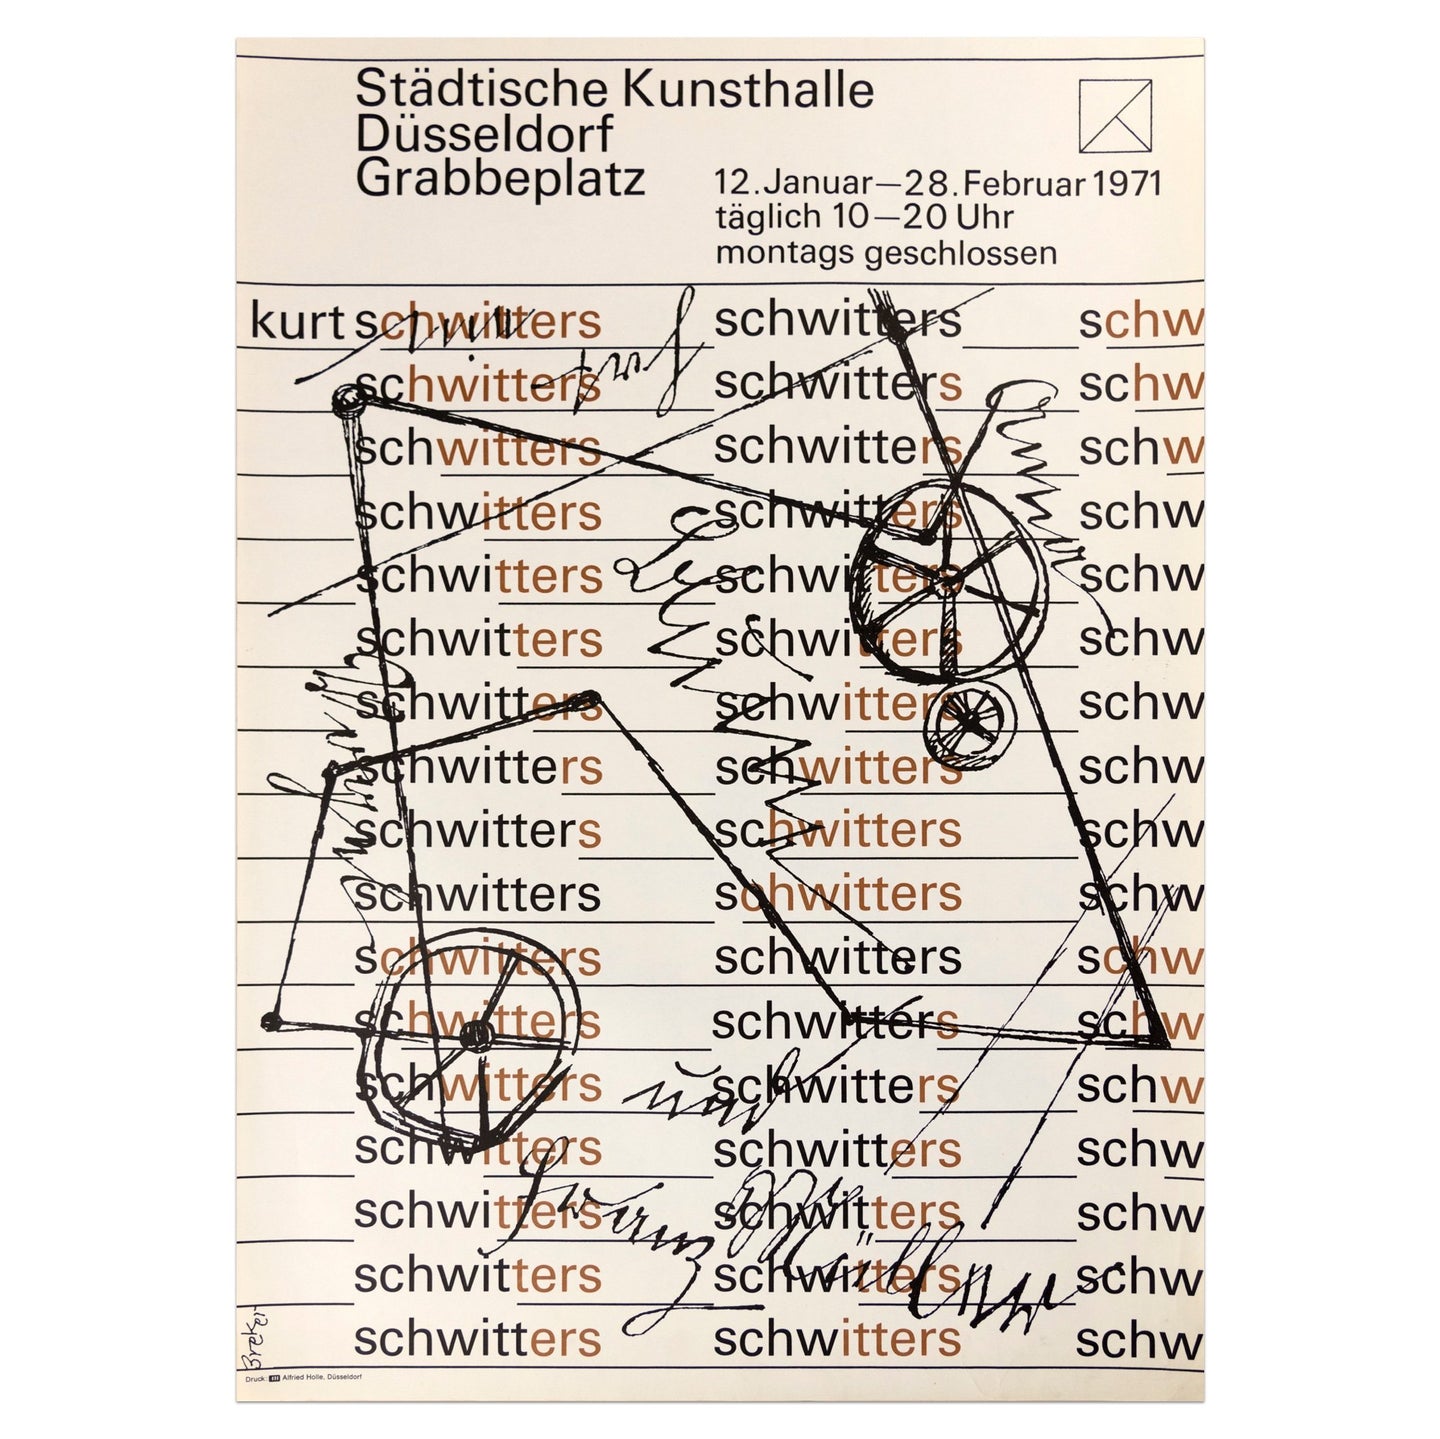 1971 Kurt Schwitters poster featuring the artist's name written multiple times in black and brown typed lettering overlayed by a drawing of a wheel contraption